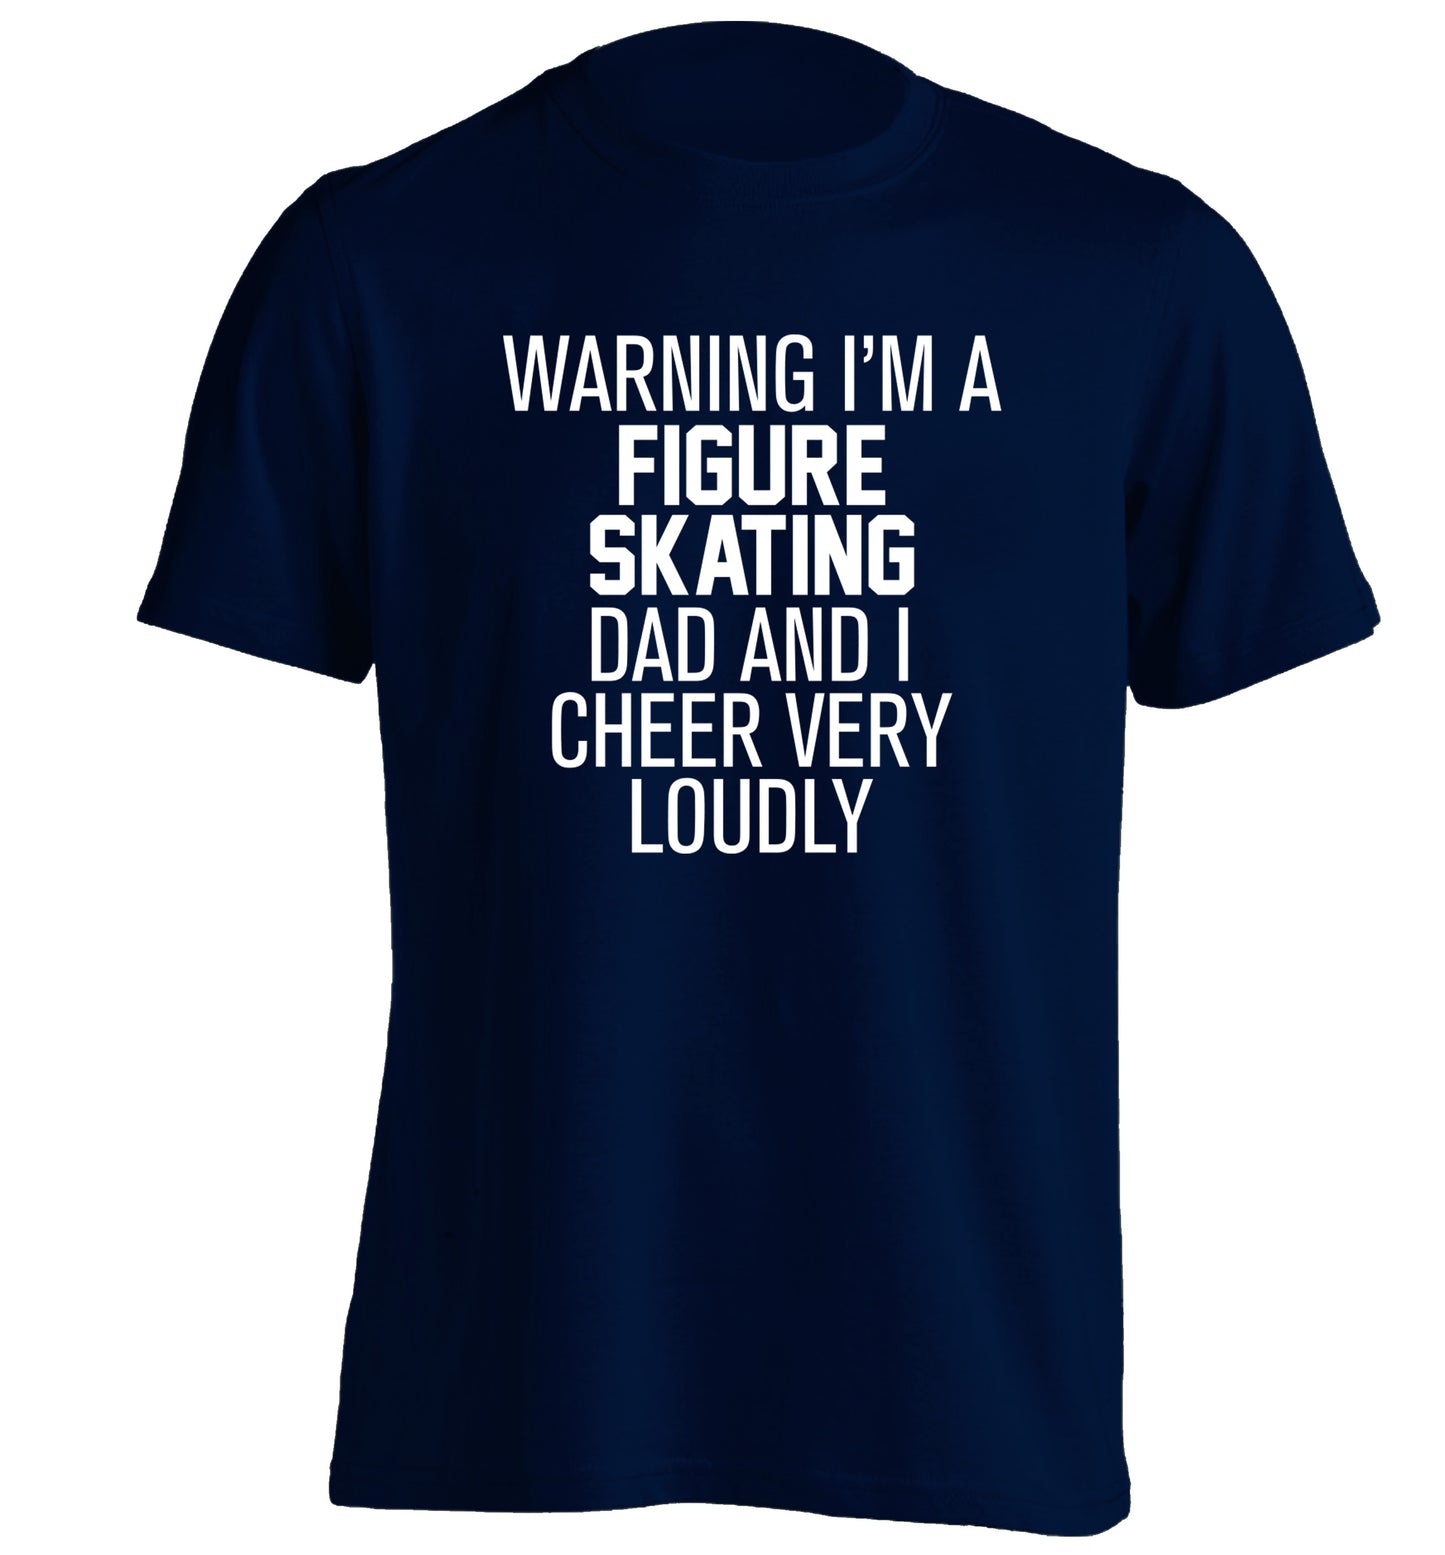 Warning I'm a figure skating dad and I cheer very loudly adults unisexnavy Tshirt 2XL